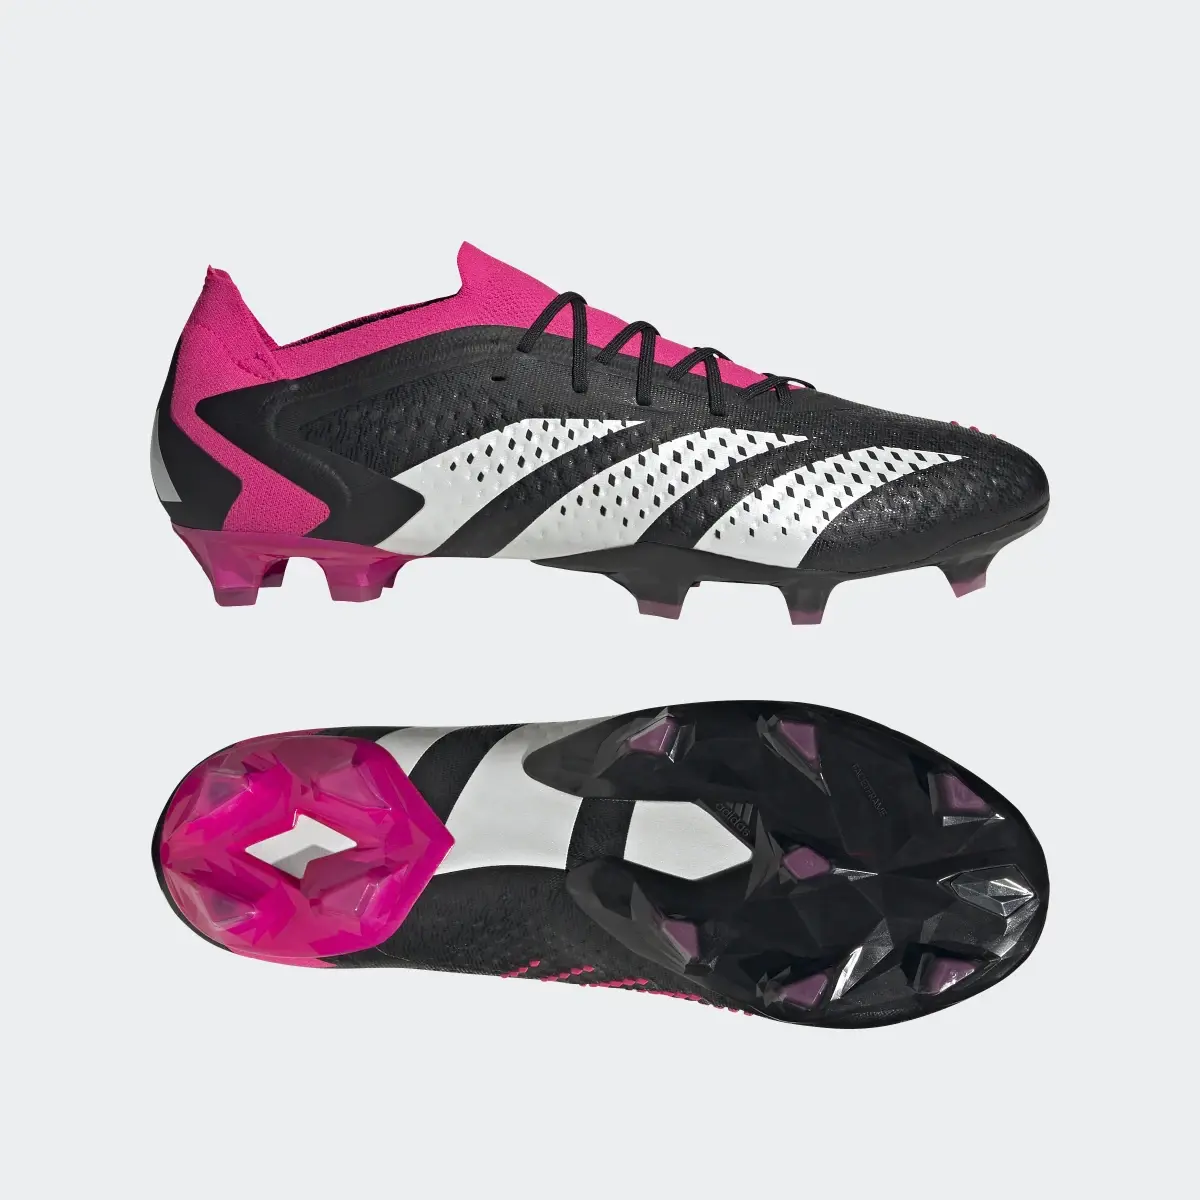 Adidas Predator Accuracy.1 Low Firm Ground Cleats. 1